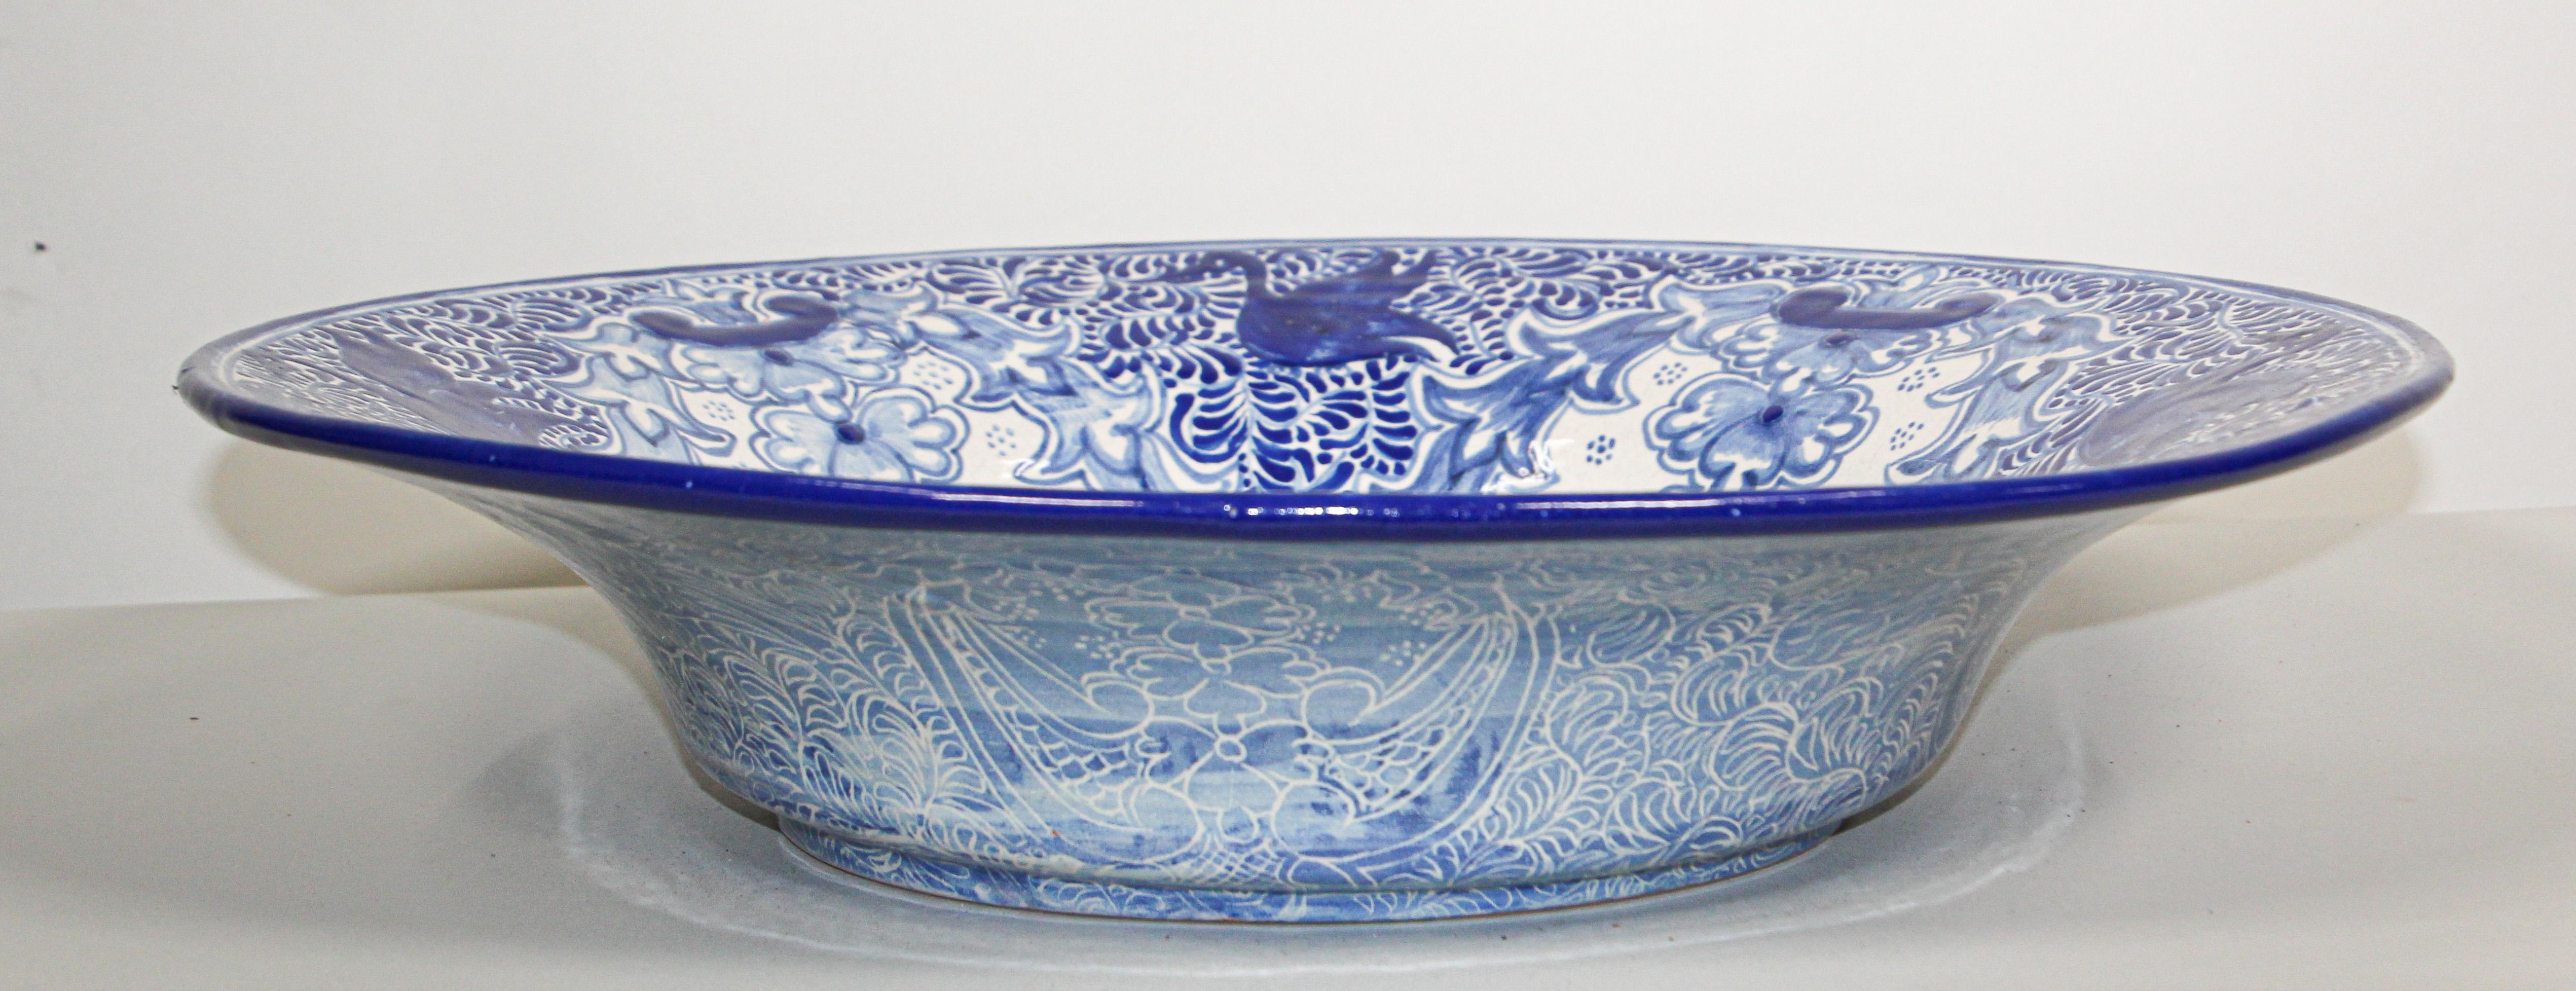 Authentic very fine large blue and white Mexican Talavera de la Reina glazed ceramic bowl.
Blue and white Mexican Talavera pottery handcrafted and hand painted with floral and birds designs in shades of blues.
Hand-painted in top and